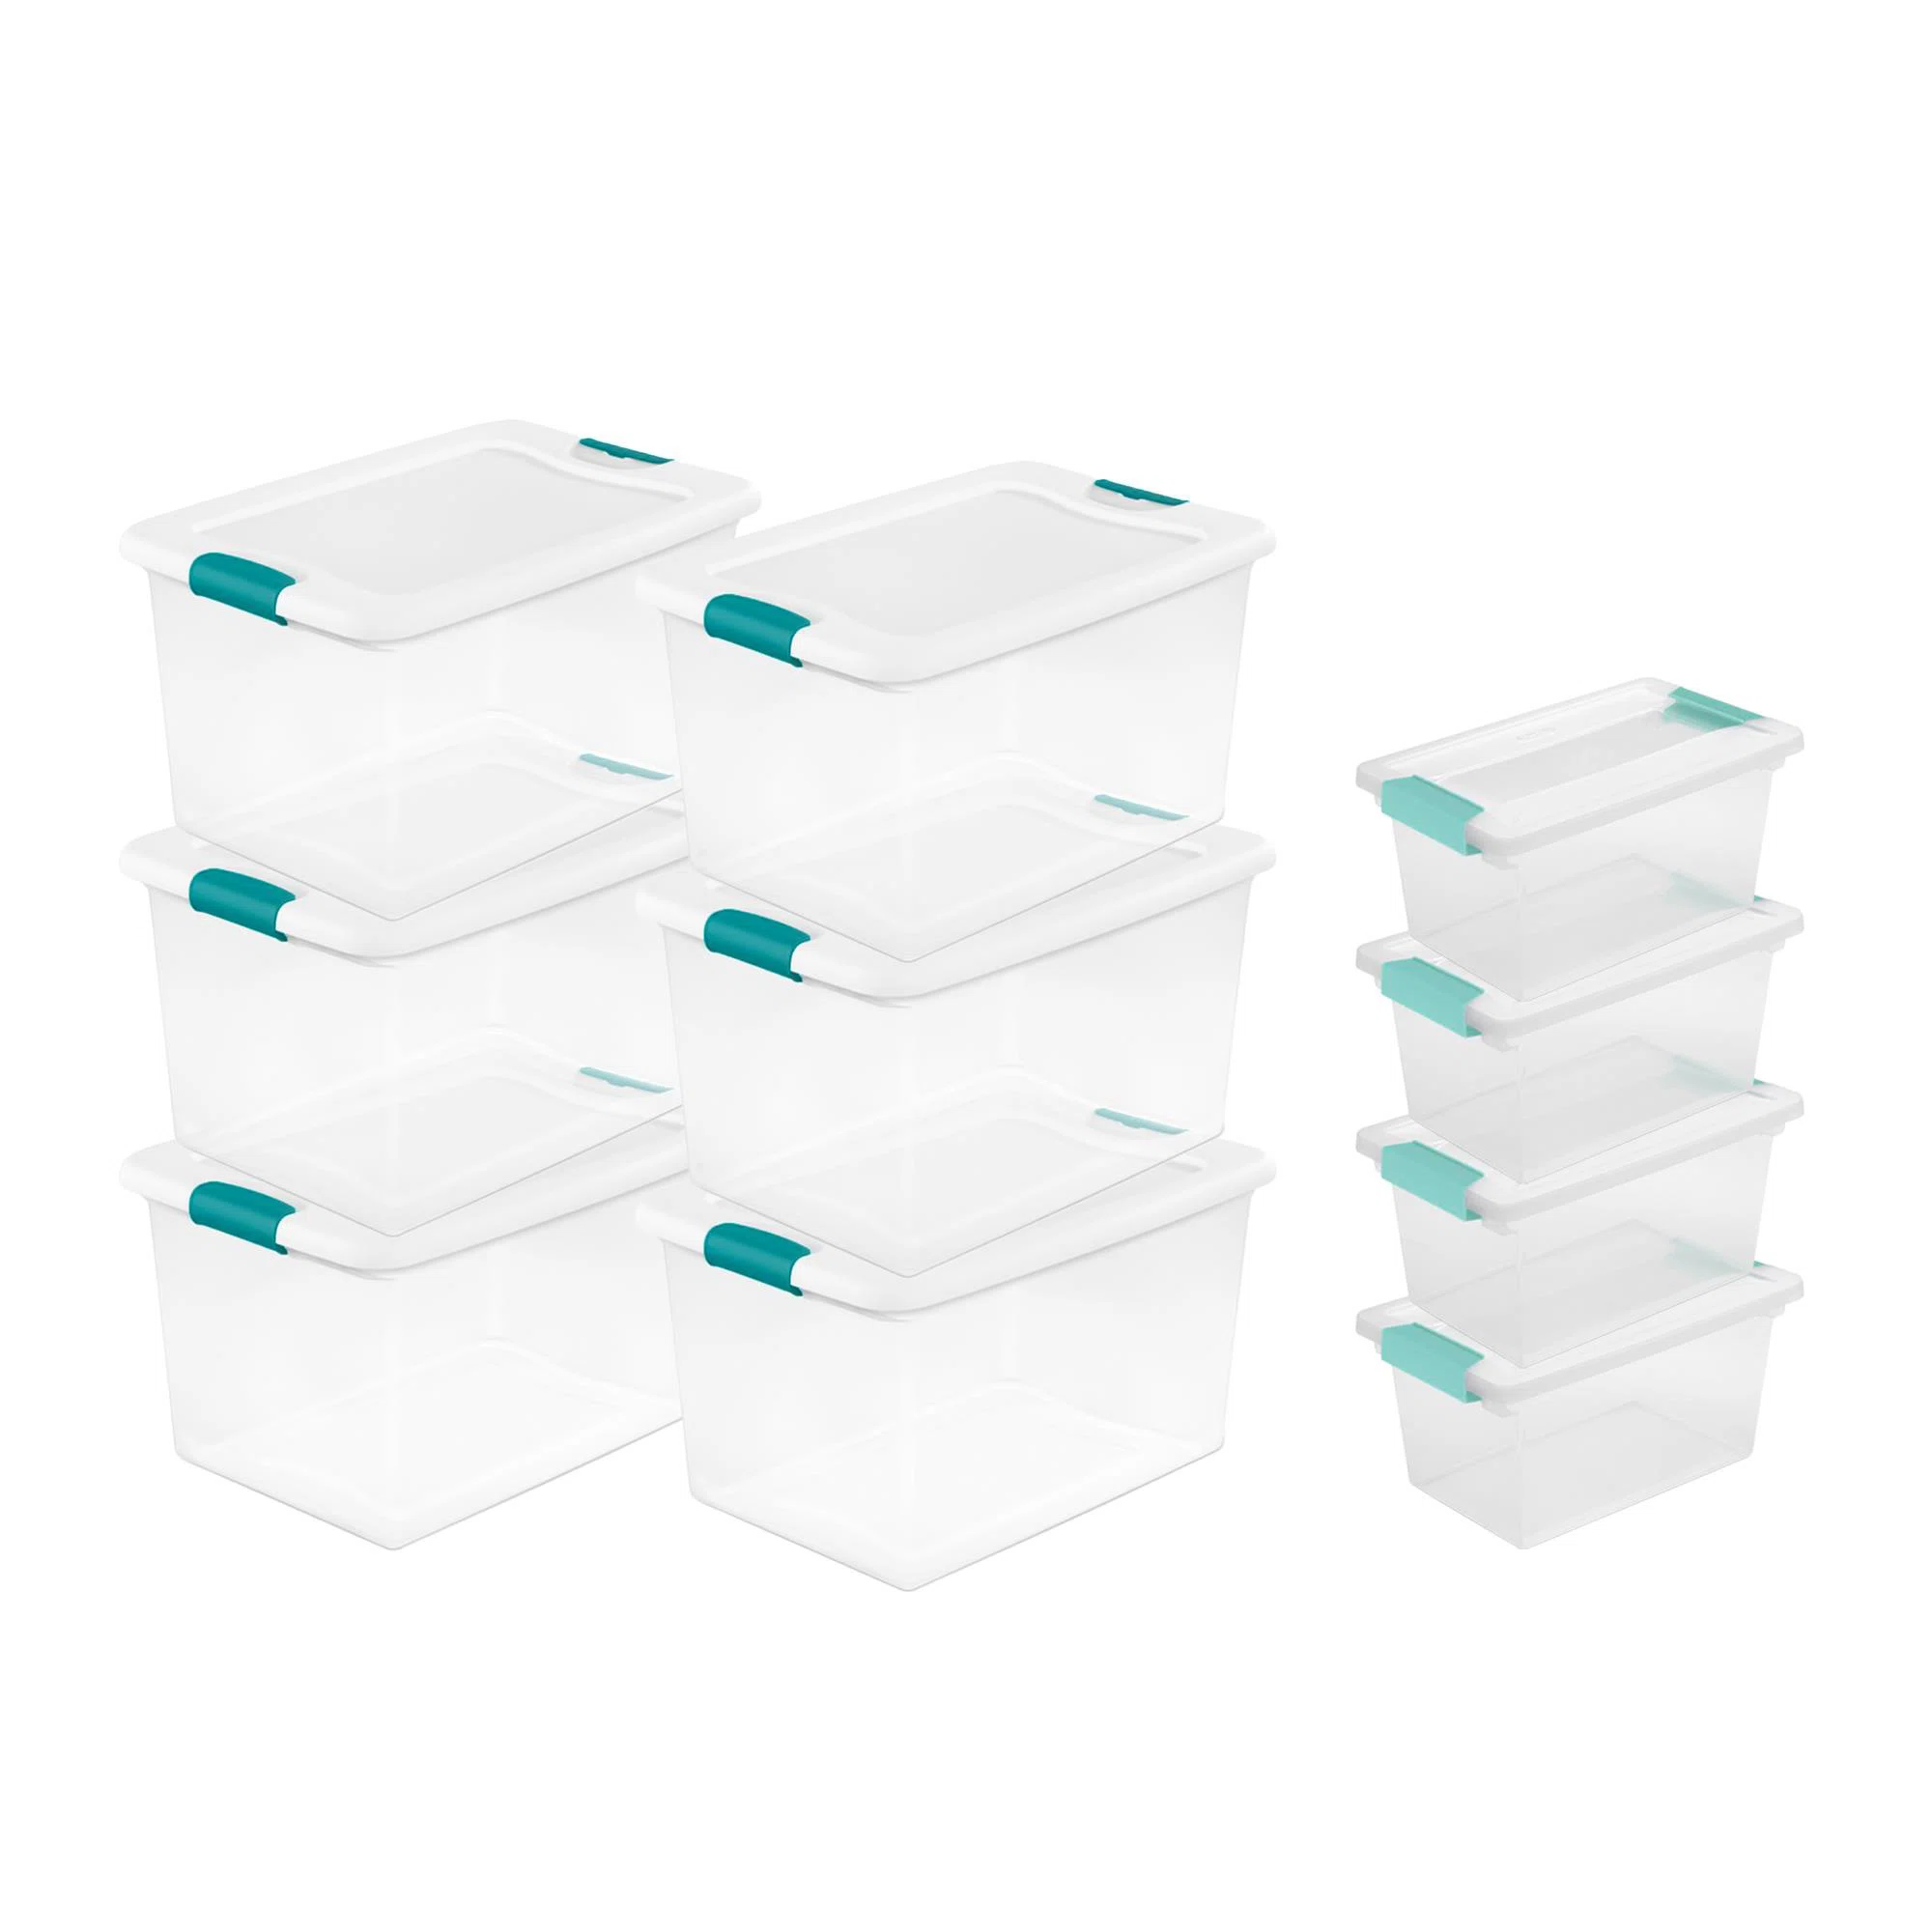  Sterilite Medium Clip Box, Stackable Small Storage Bin with  Latching Lid, Plastic Container to Organize Office, Crafts, Clear Base and  Lid, 12-Pack